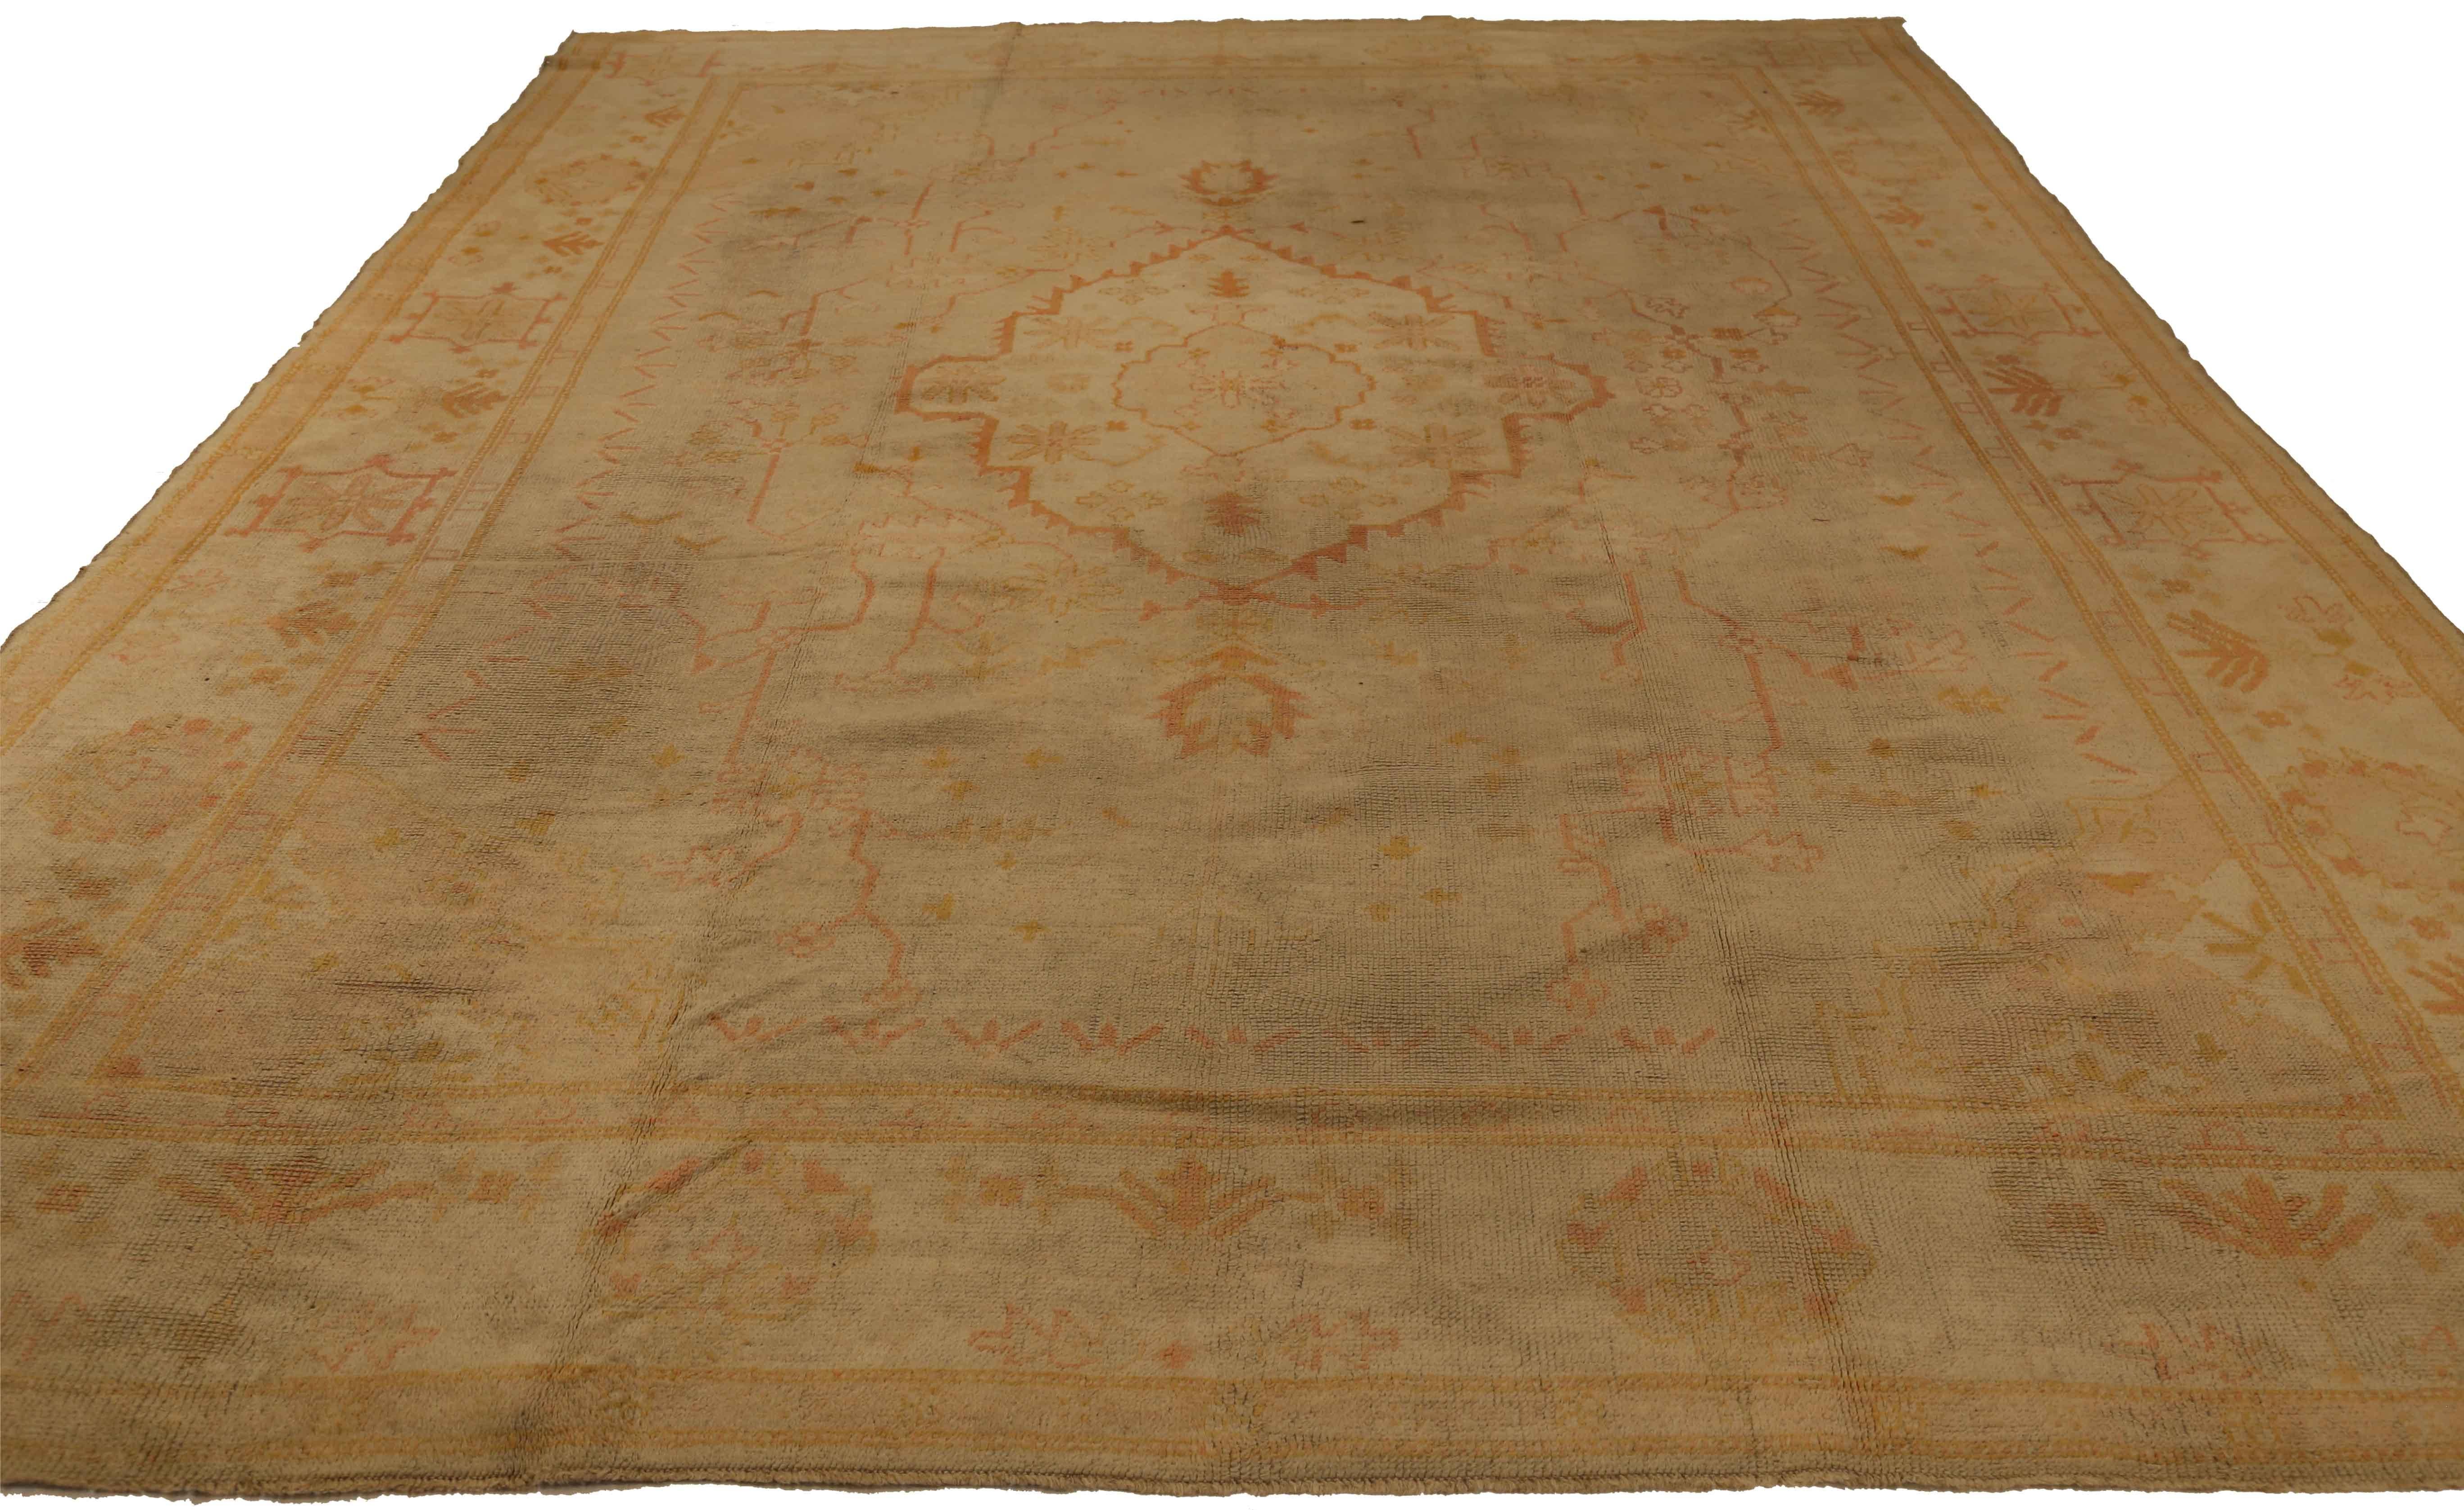 1910s Antique Persian Oushak Rug with Ivory and Beige Flower Field Design In Excellent Condition For Sale In Dallas, TX